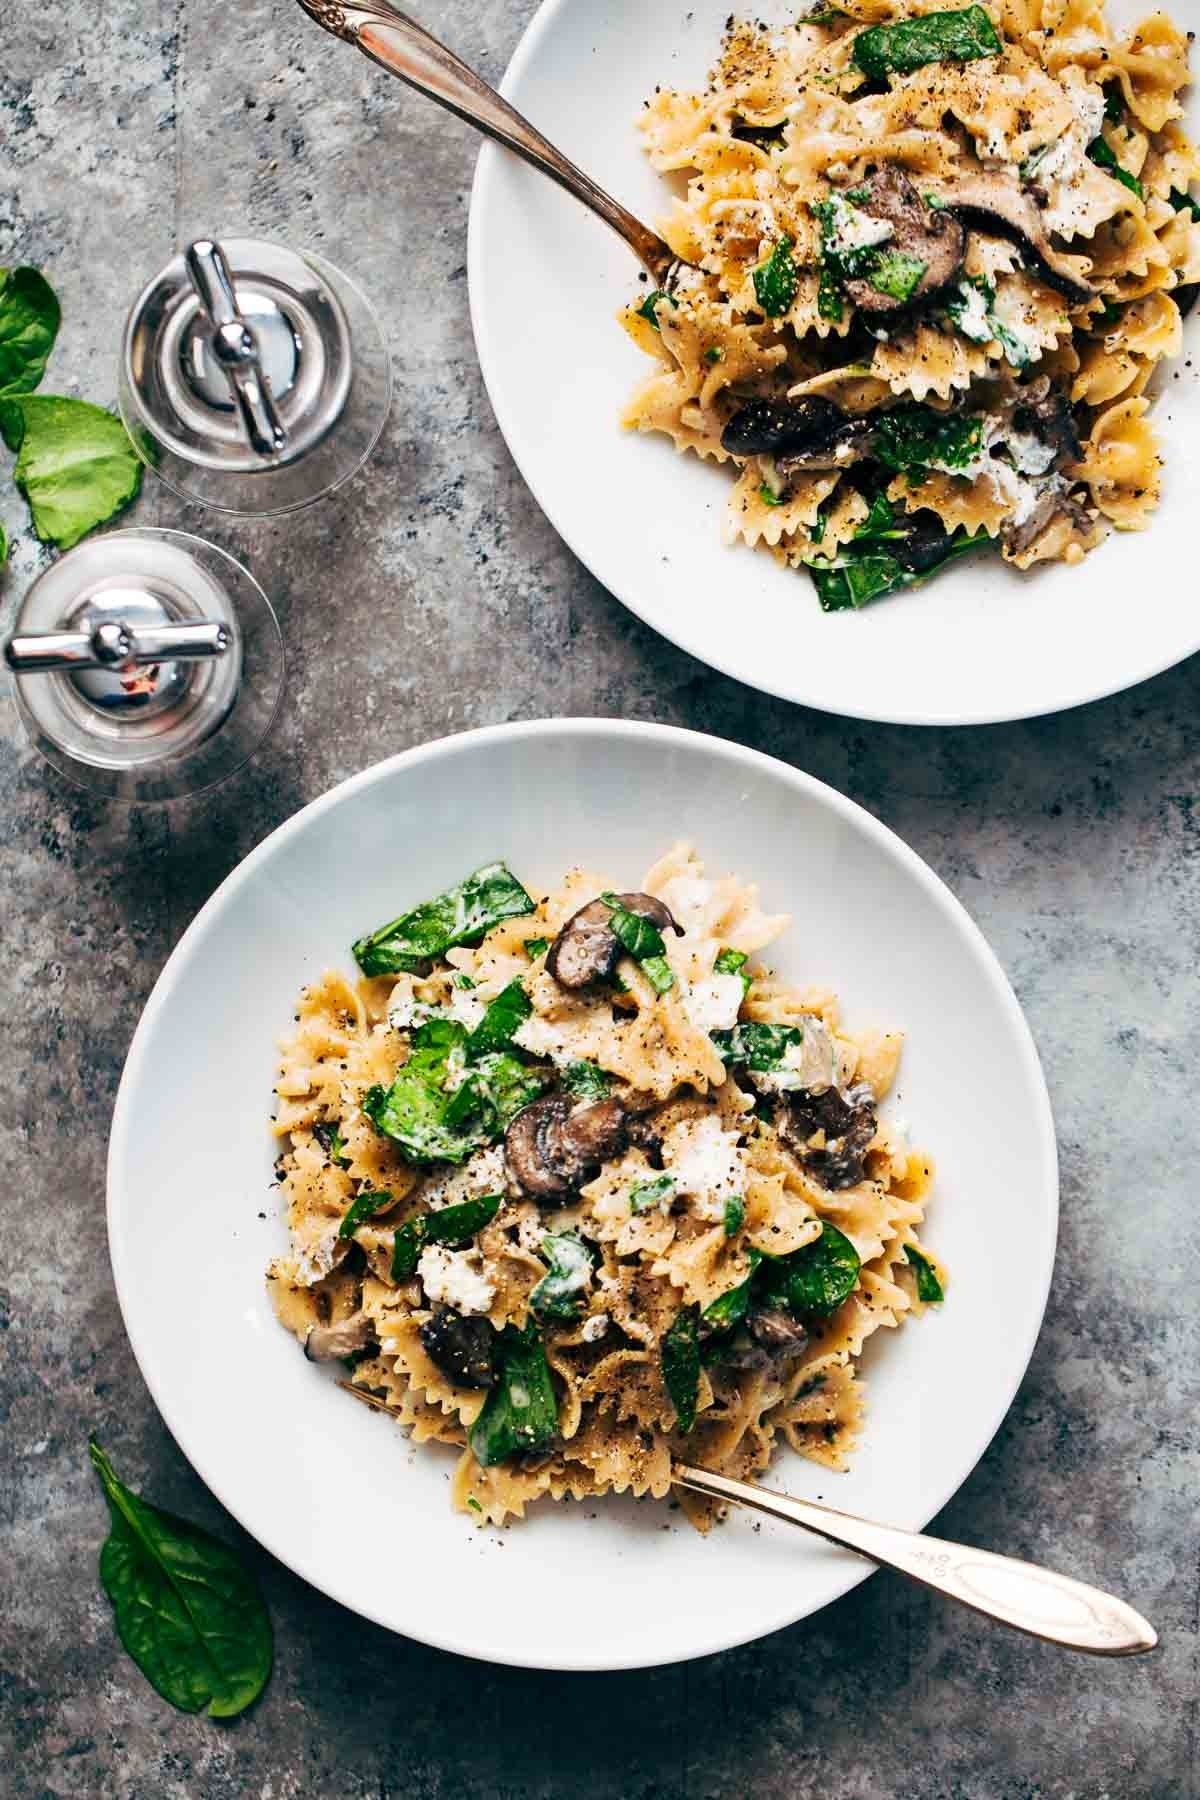 10 Beautiful Healthy Dinner Ideas For Two date night mushroom pasta with goat cheese recipe pinch of yum 2 2023